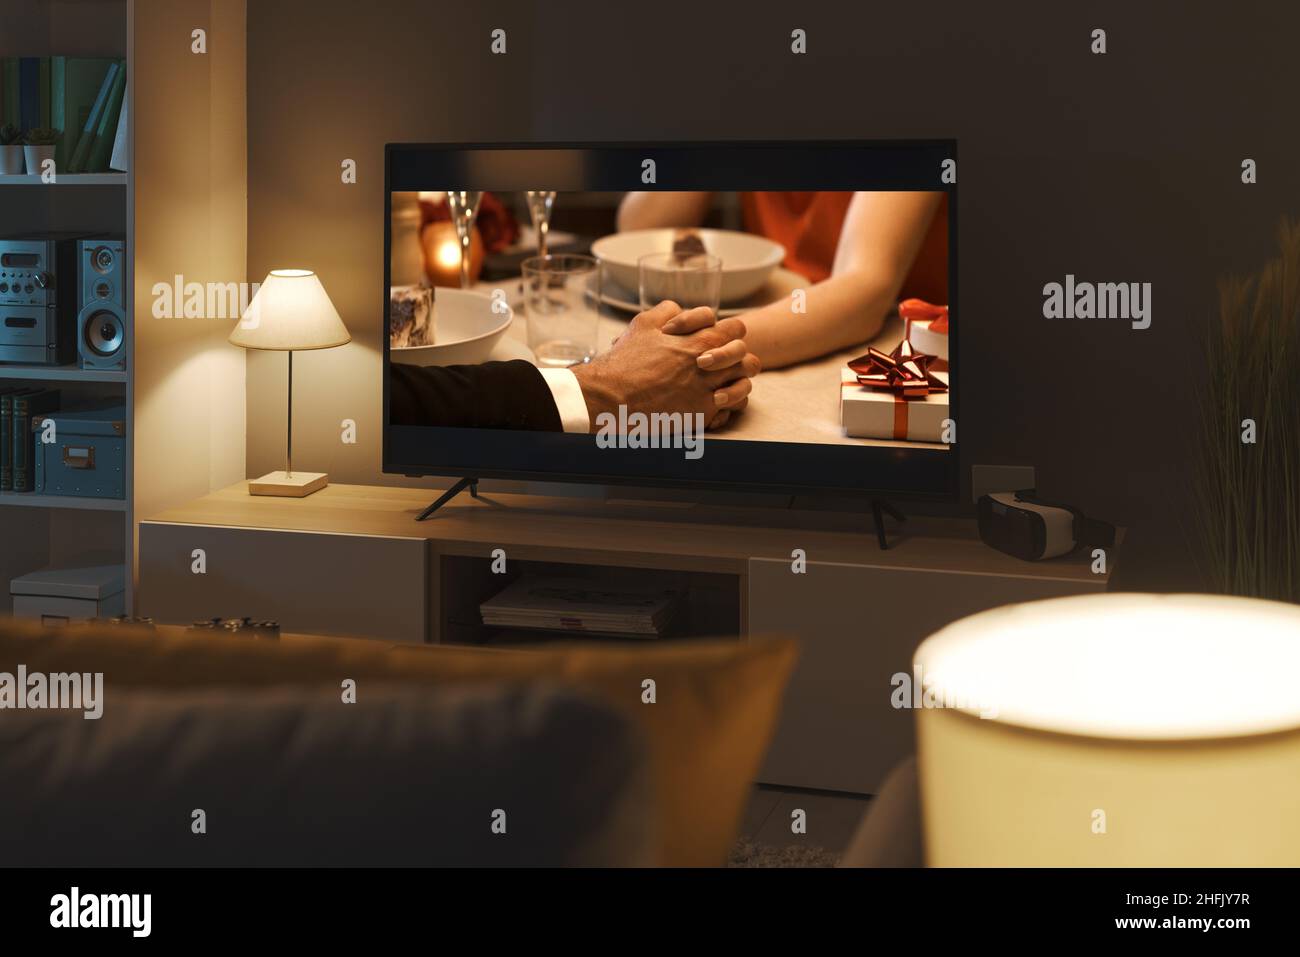 Romantic comedy movie streaming on TV and living room interior Stock Photo